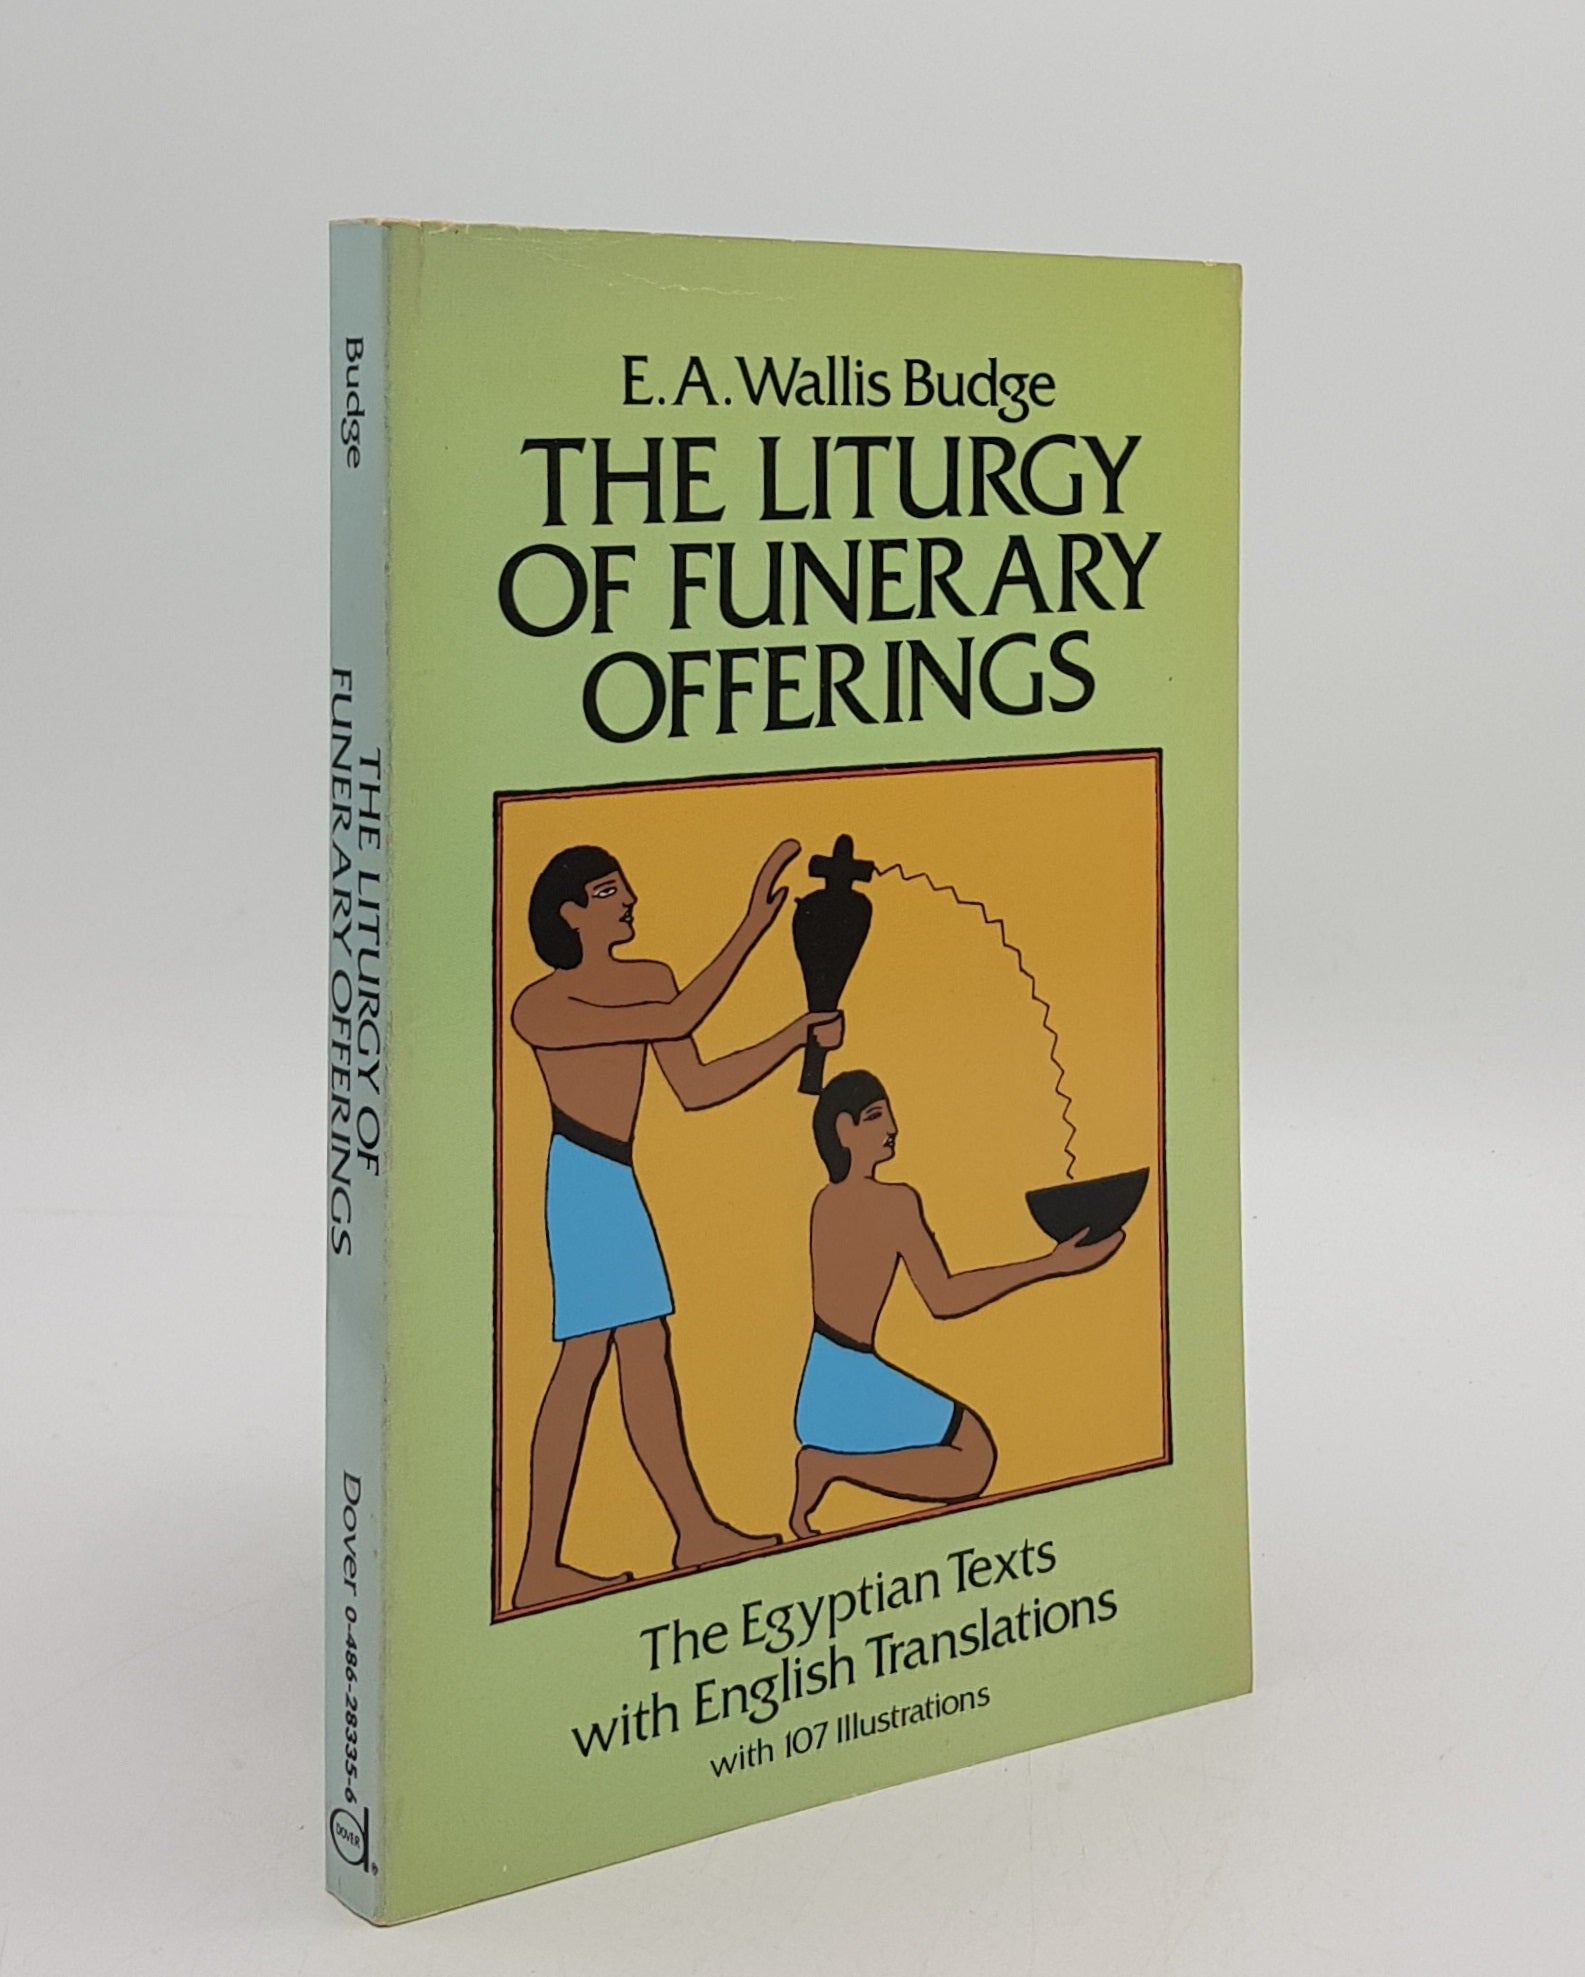 WALLIS BUDGE E.A. - The Liturgy of Funerary Offerings